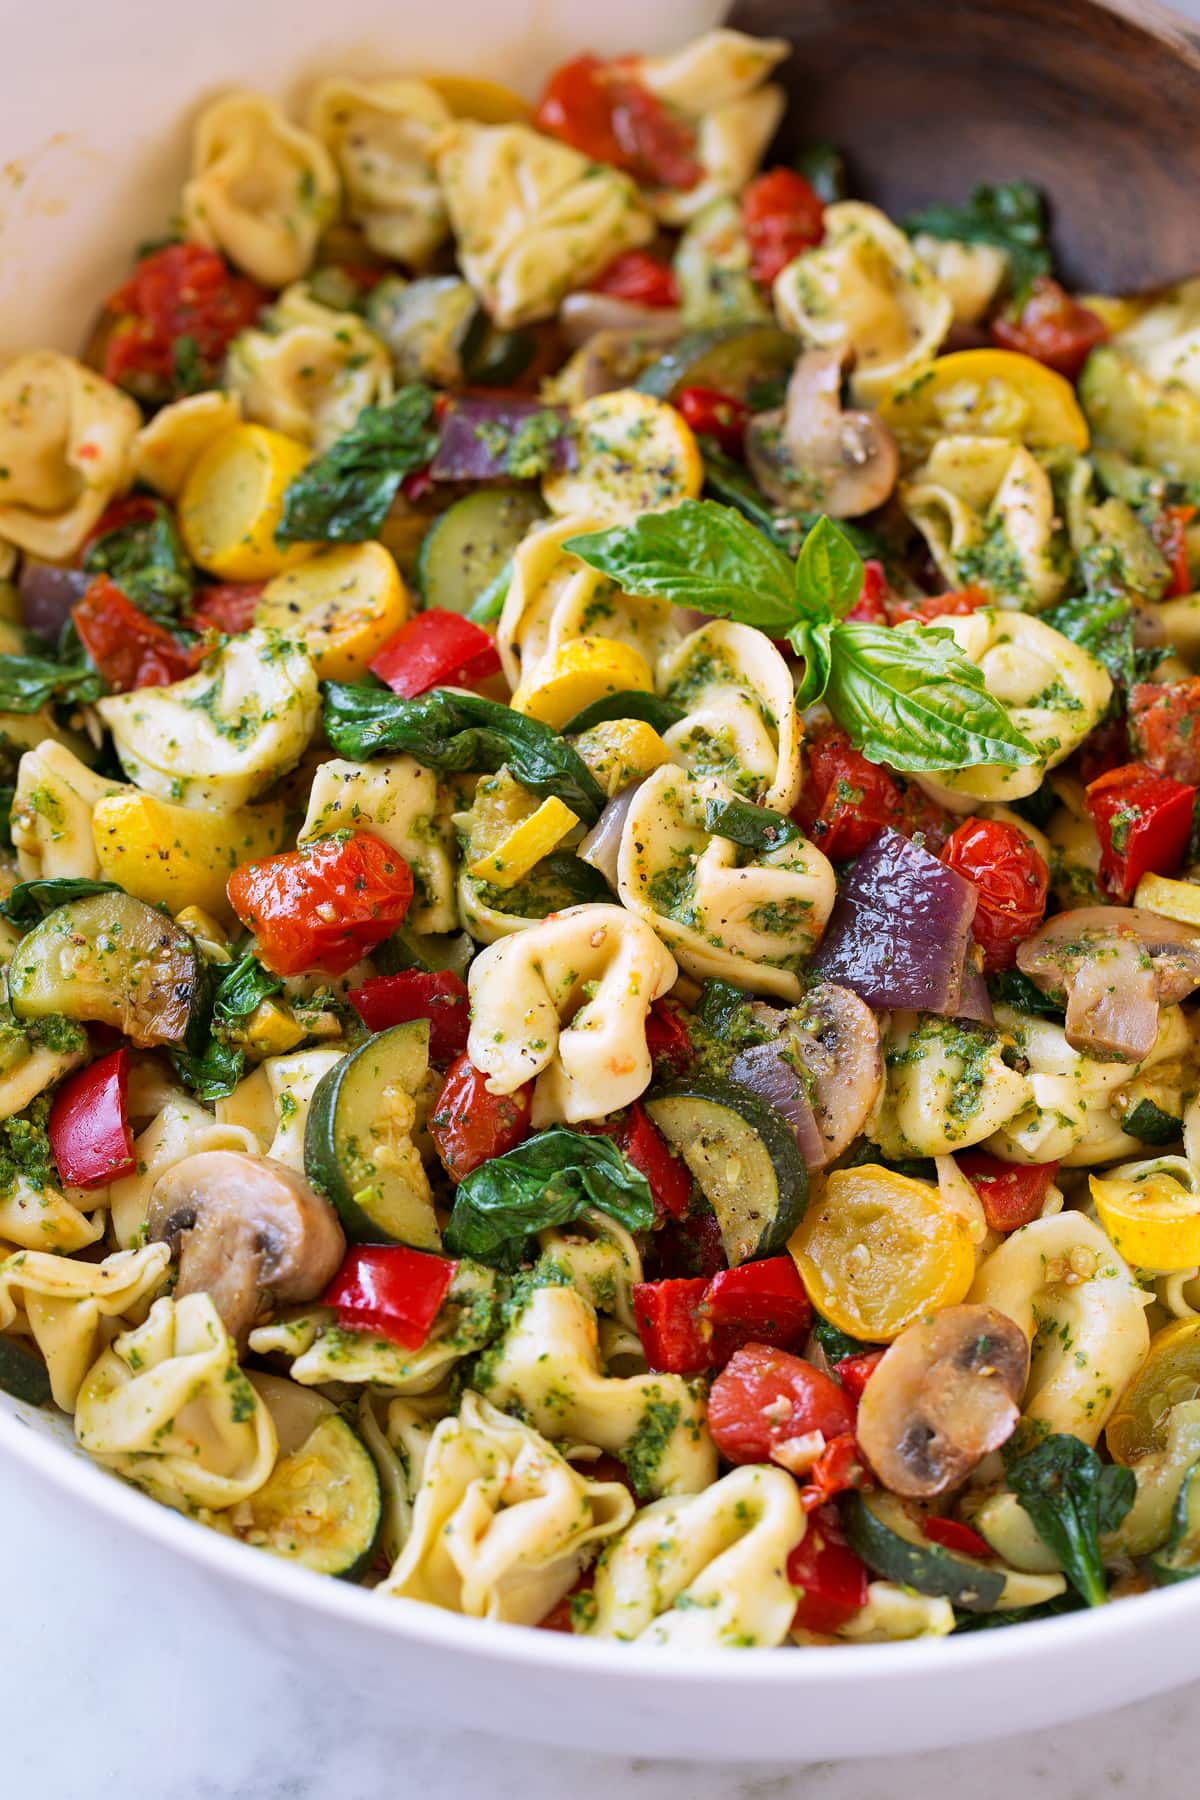 Tortellini with Pesto and Roasted Vegetables